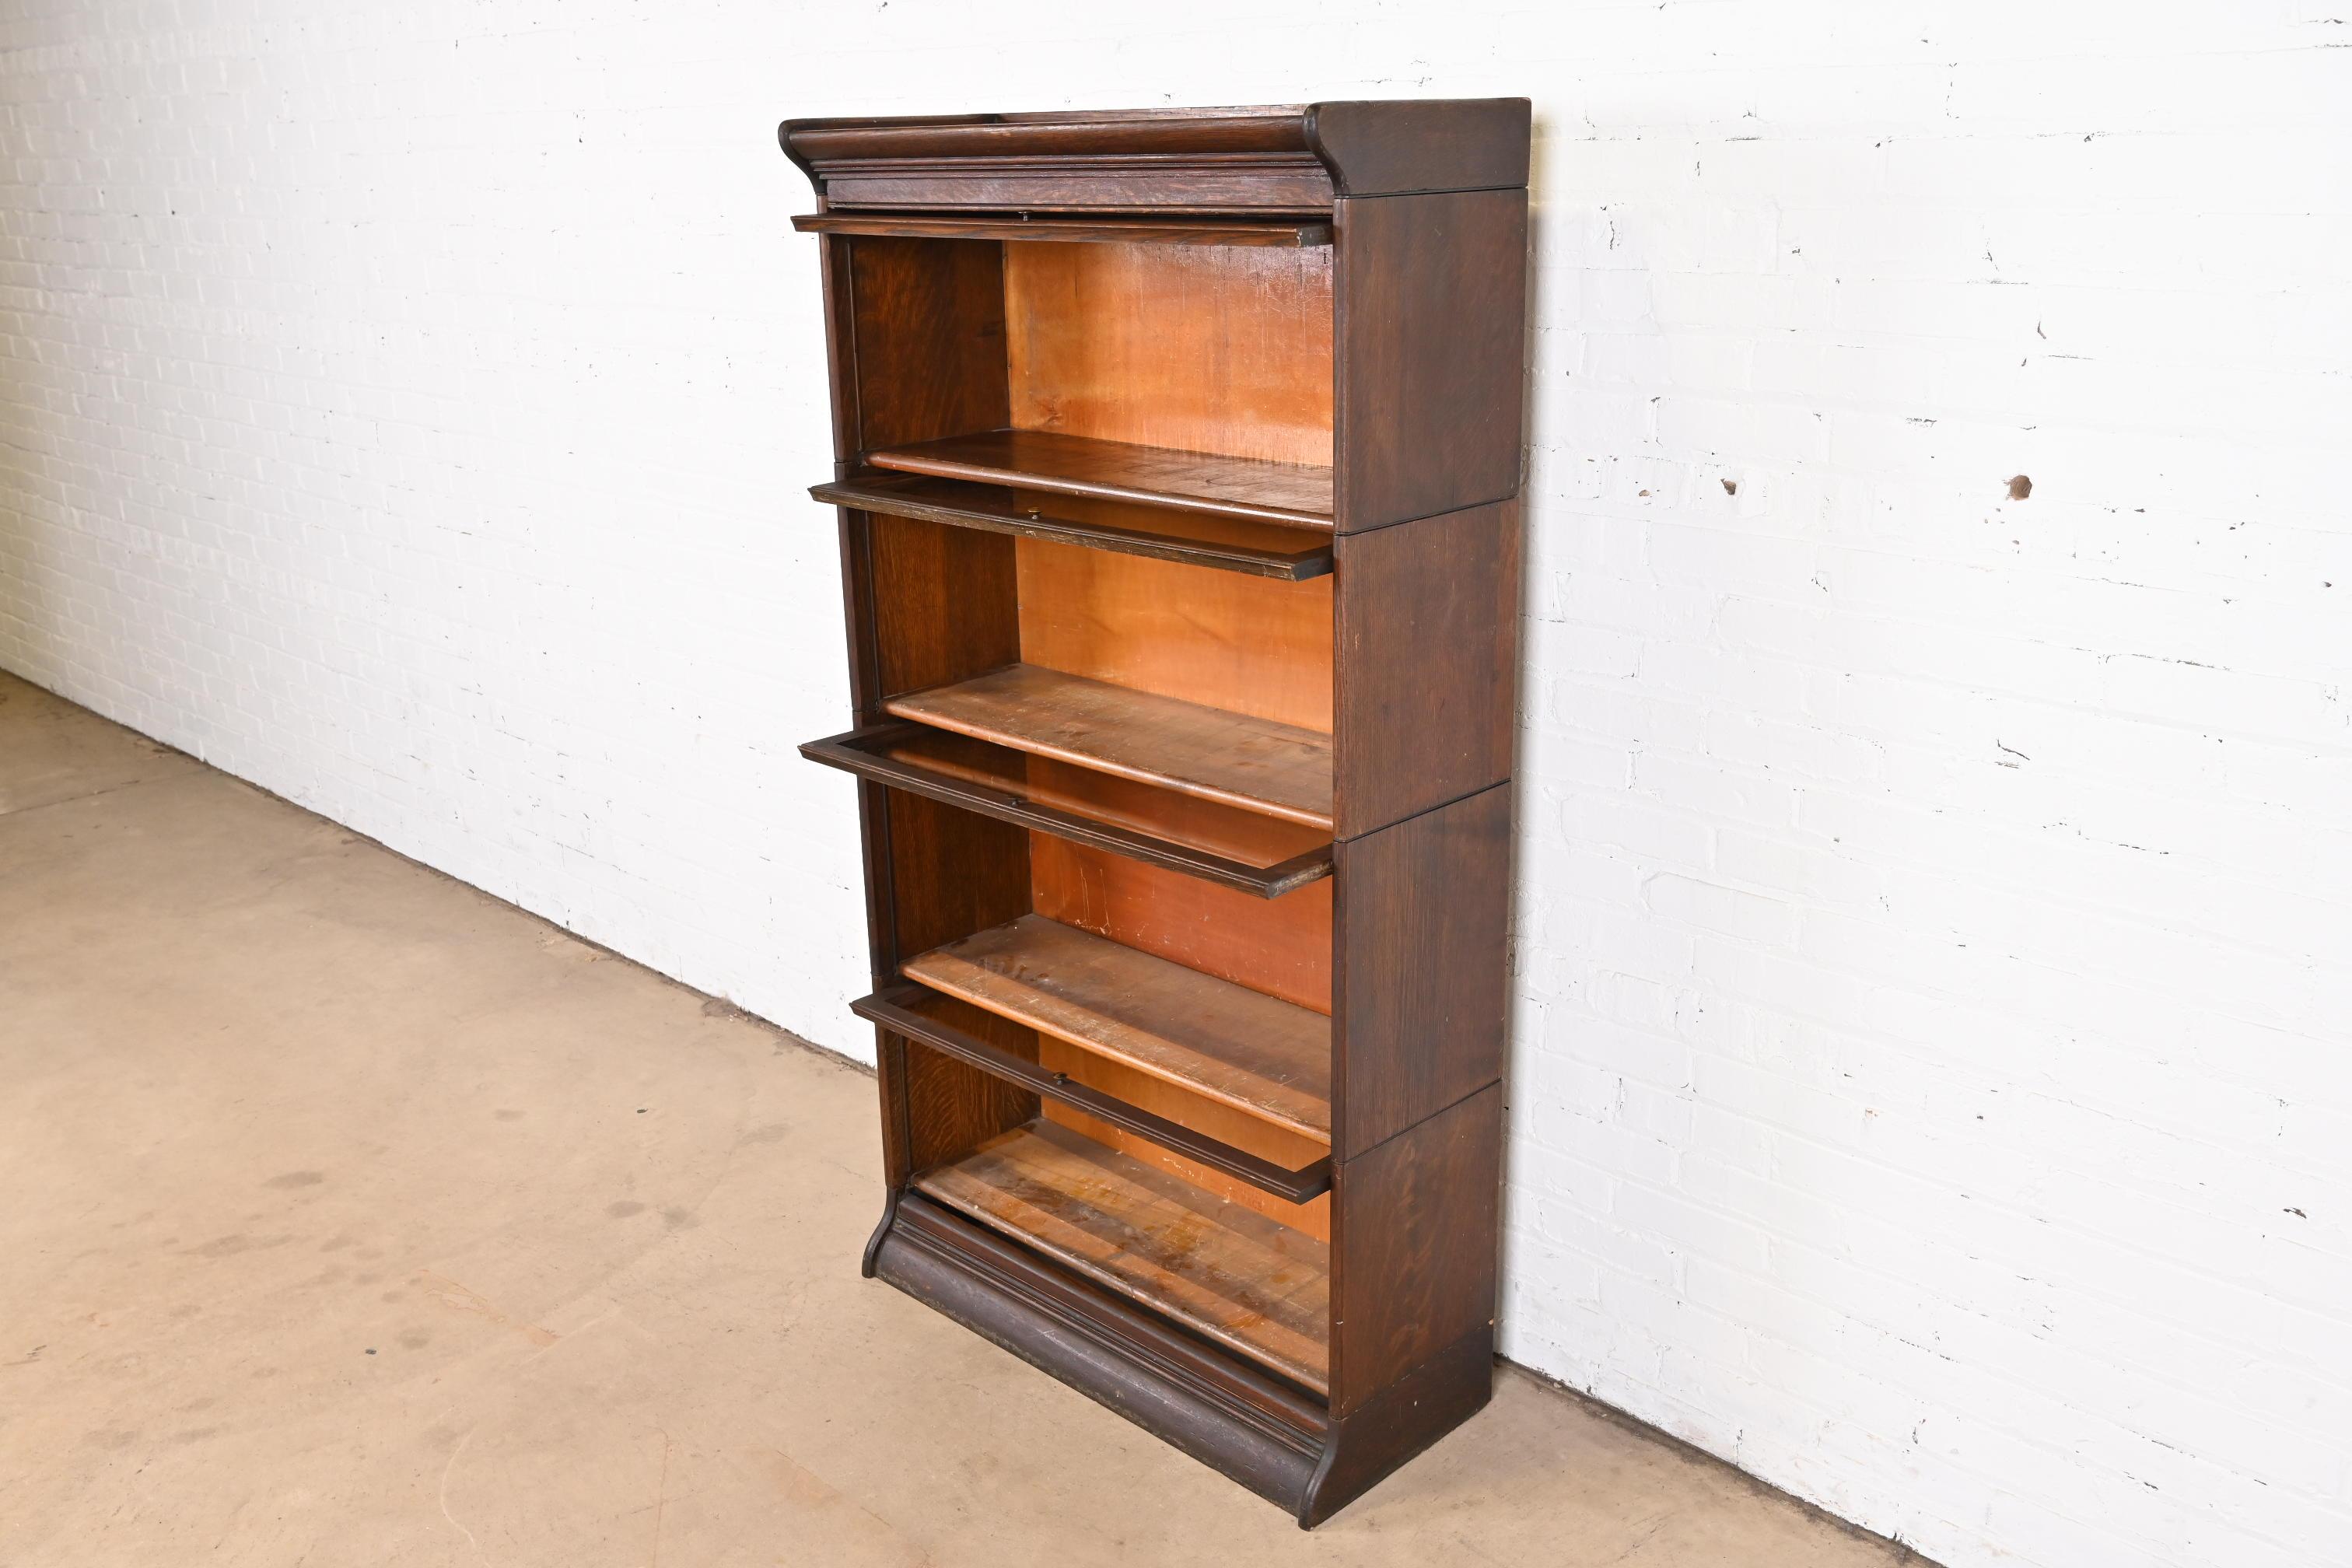 Early 20th Century Antique Arts & Crafts Oak Four-Stack Barrister Bookcase by Gunn, circa 1920s For Sale